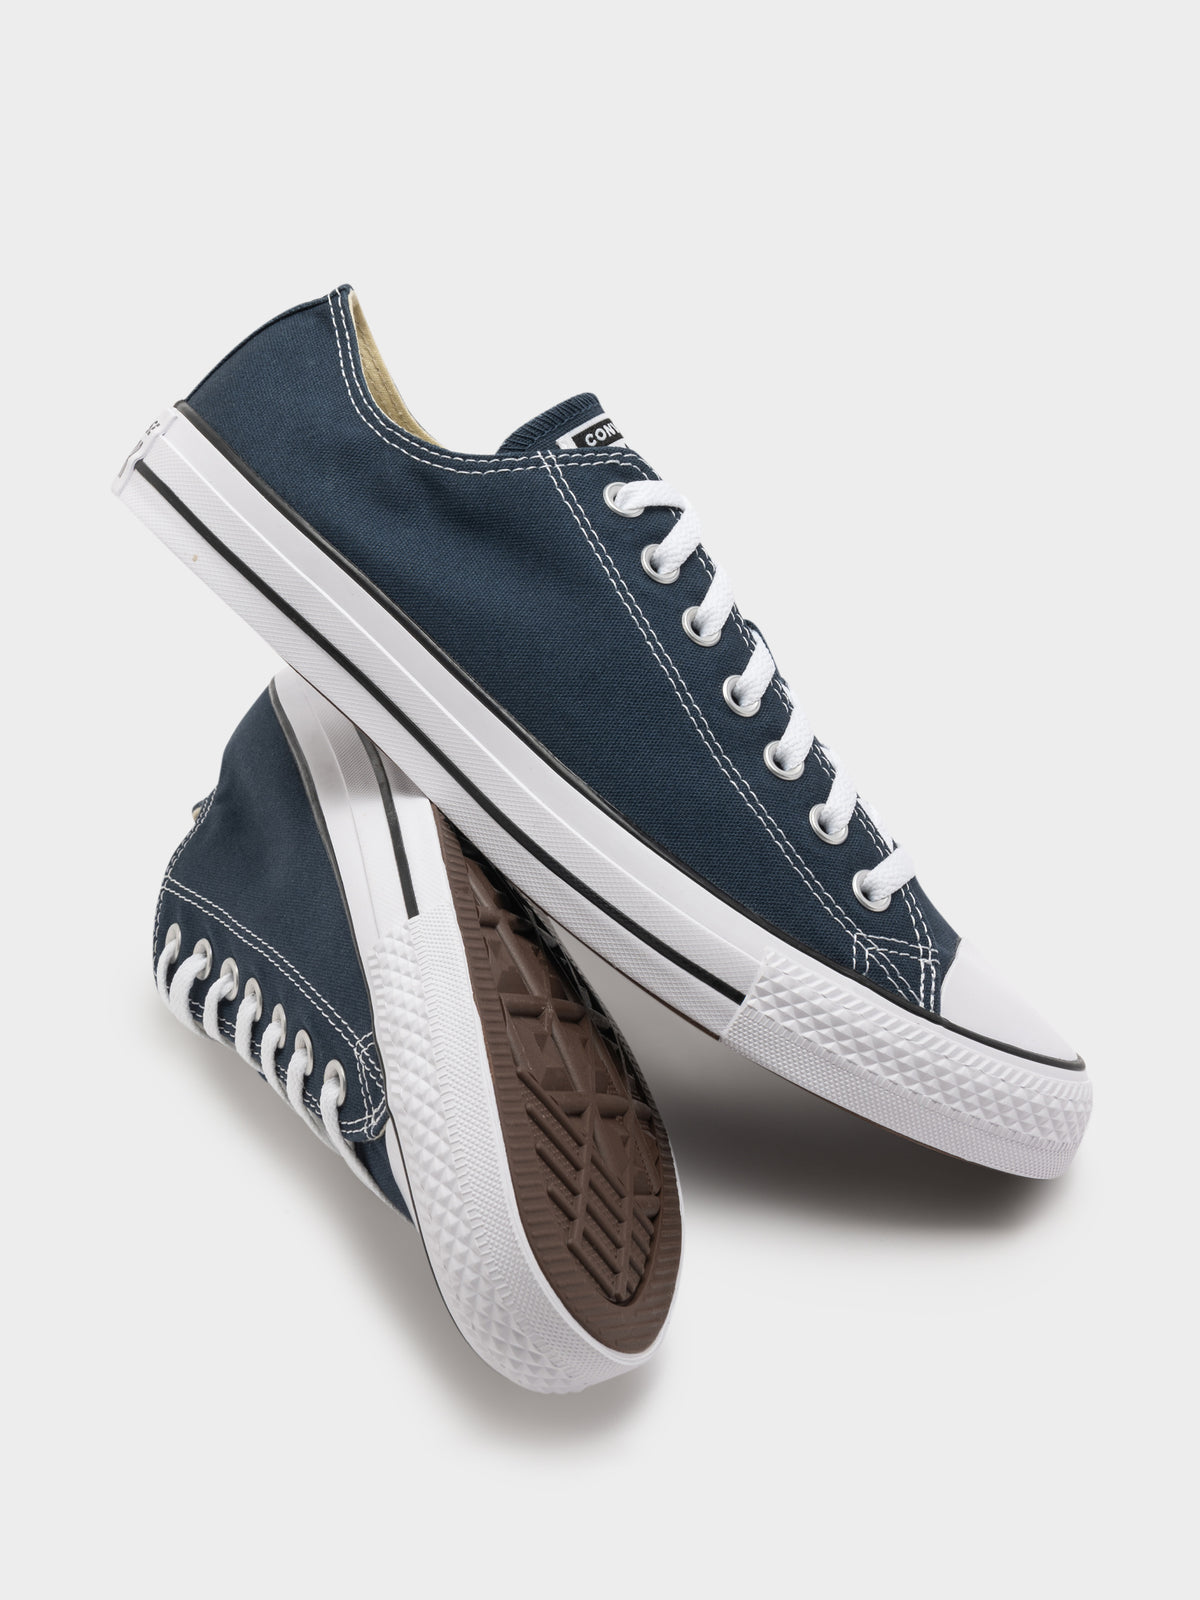 Unisex Converse Chuck Taylor All Star Classic Low Top in Navy